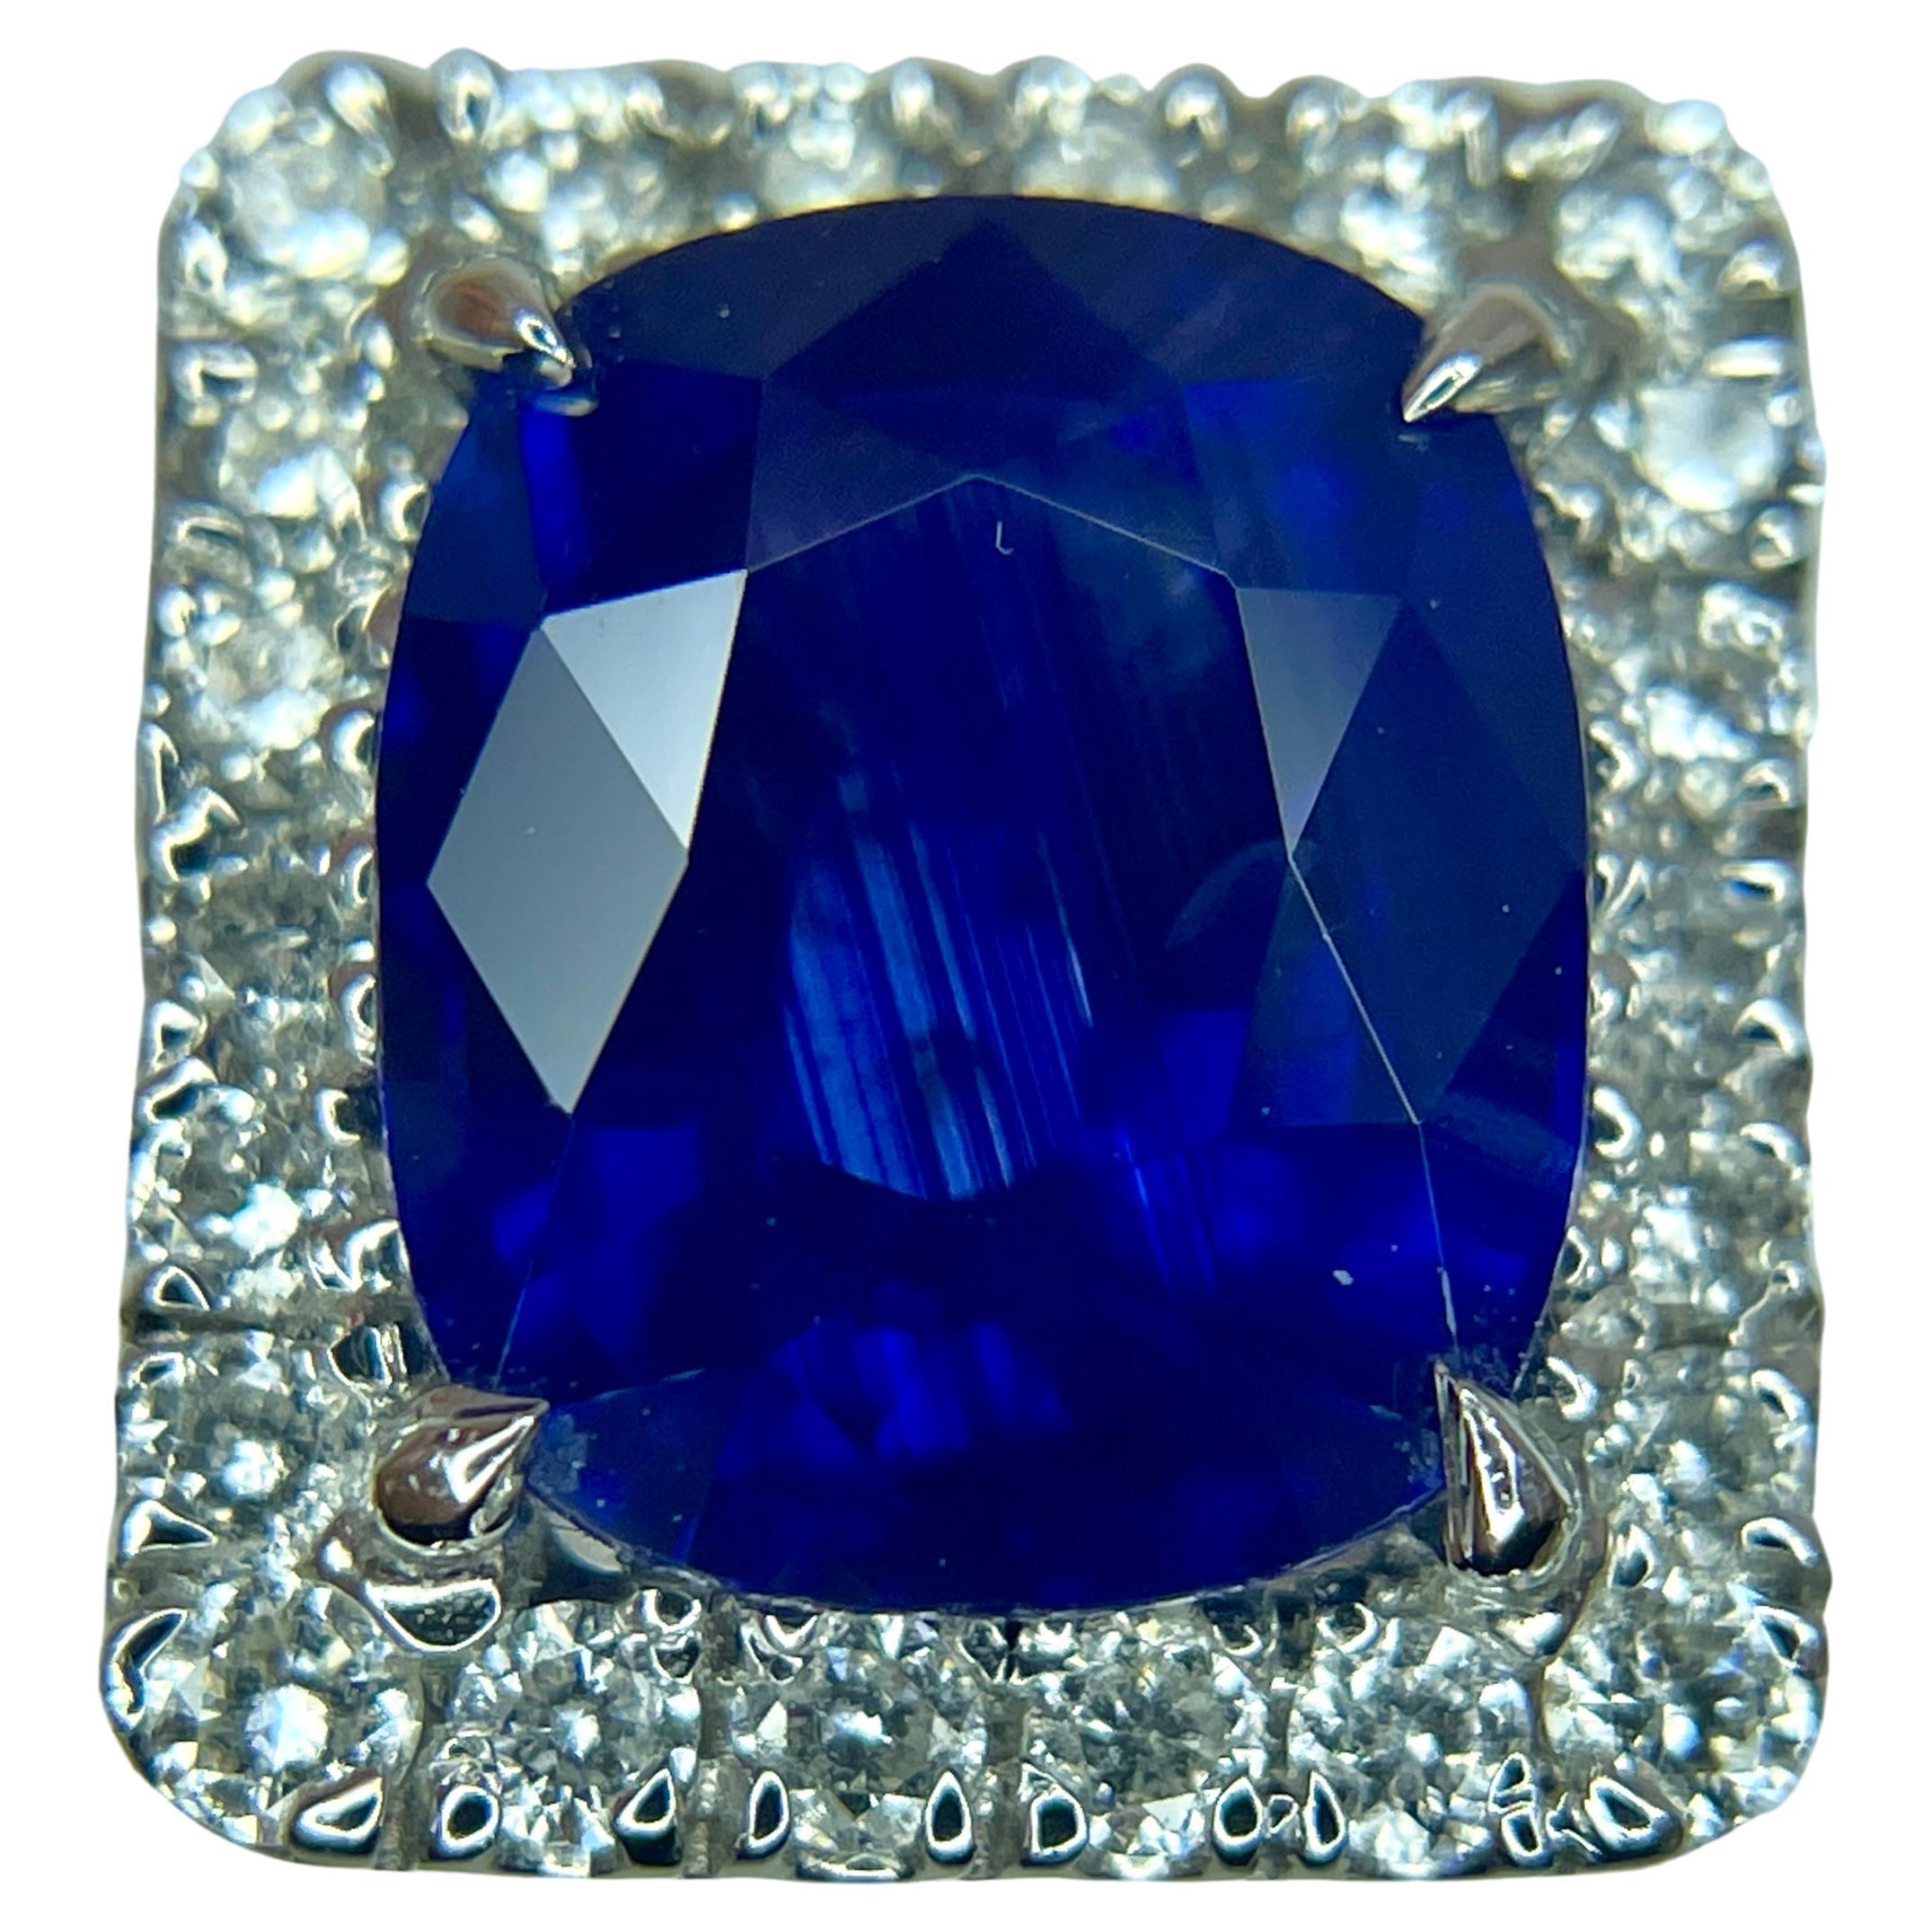 This is a GORGEOUS blue sapphire mined in Sri Lanka. It is fully saturated. This sapphire has a beautiful blue and mounted in a detailed and 18K white gold ring with 0.93 carats of brilliant white diamonds.